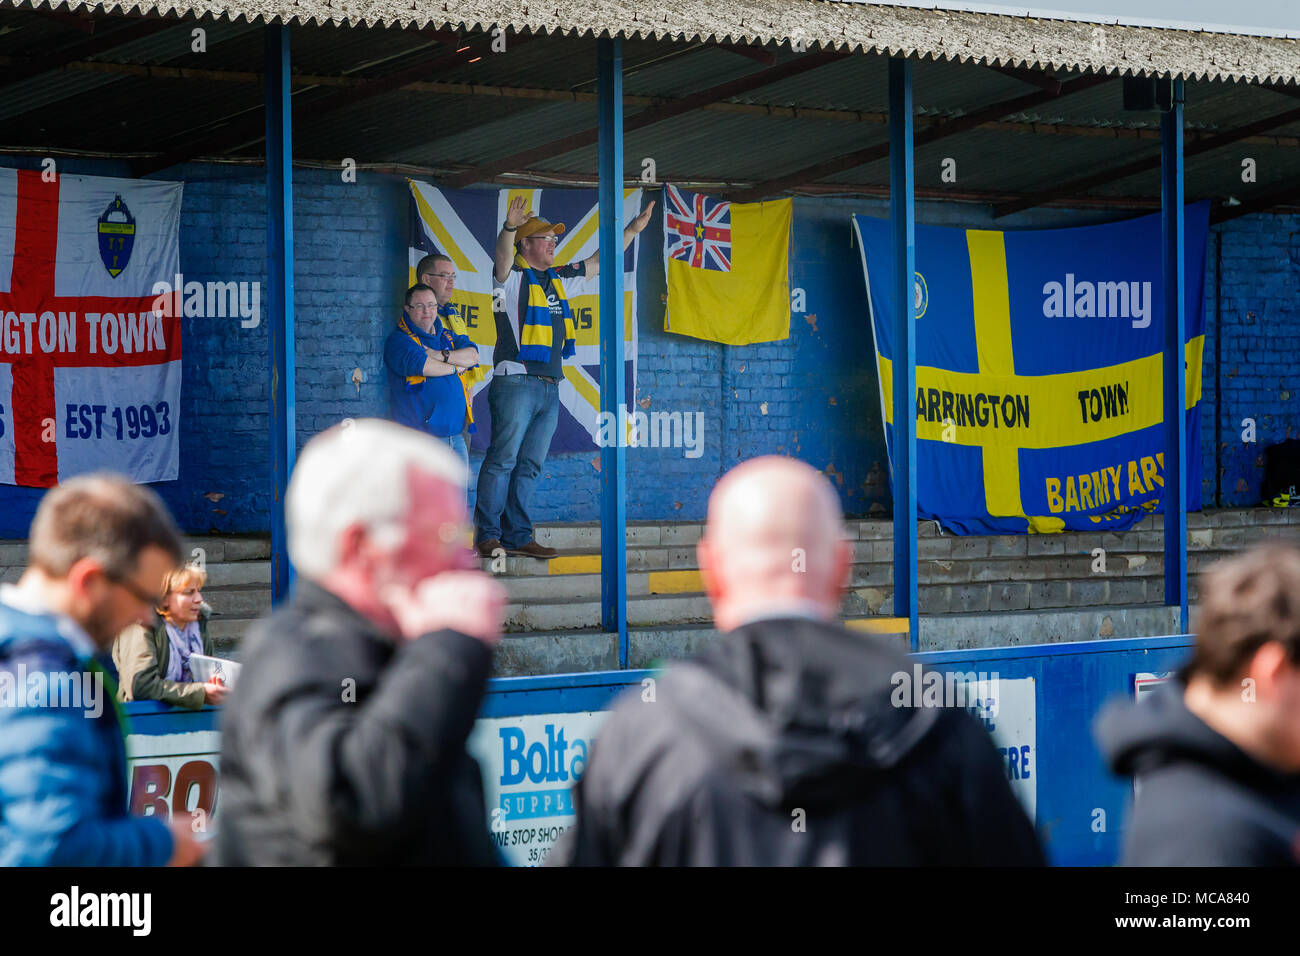 Three Warrington Town supporters stand in front of their flags behind the goal at Throstle Nest, Farsley during the match between Warrington Town FC and Farsley Celtic on 14 April 2018 where Warrington won 2 - 0 Credit: John Hopkins/Alamy Live News Stock Photo